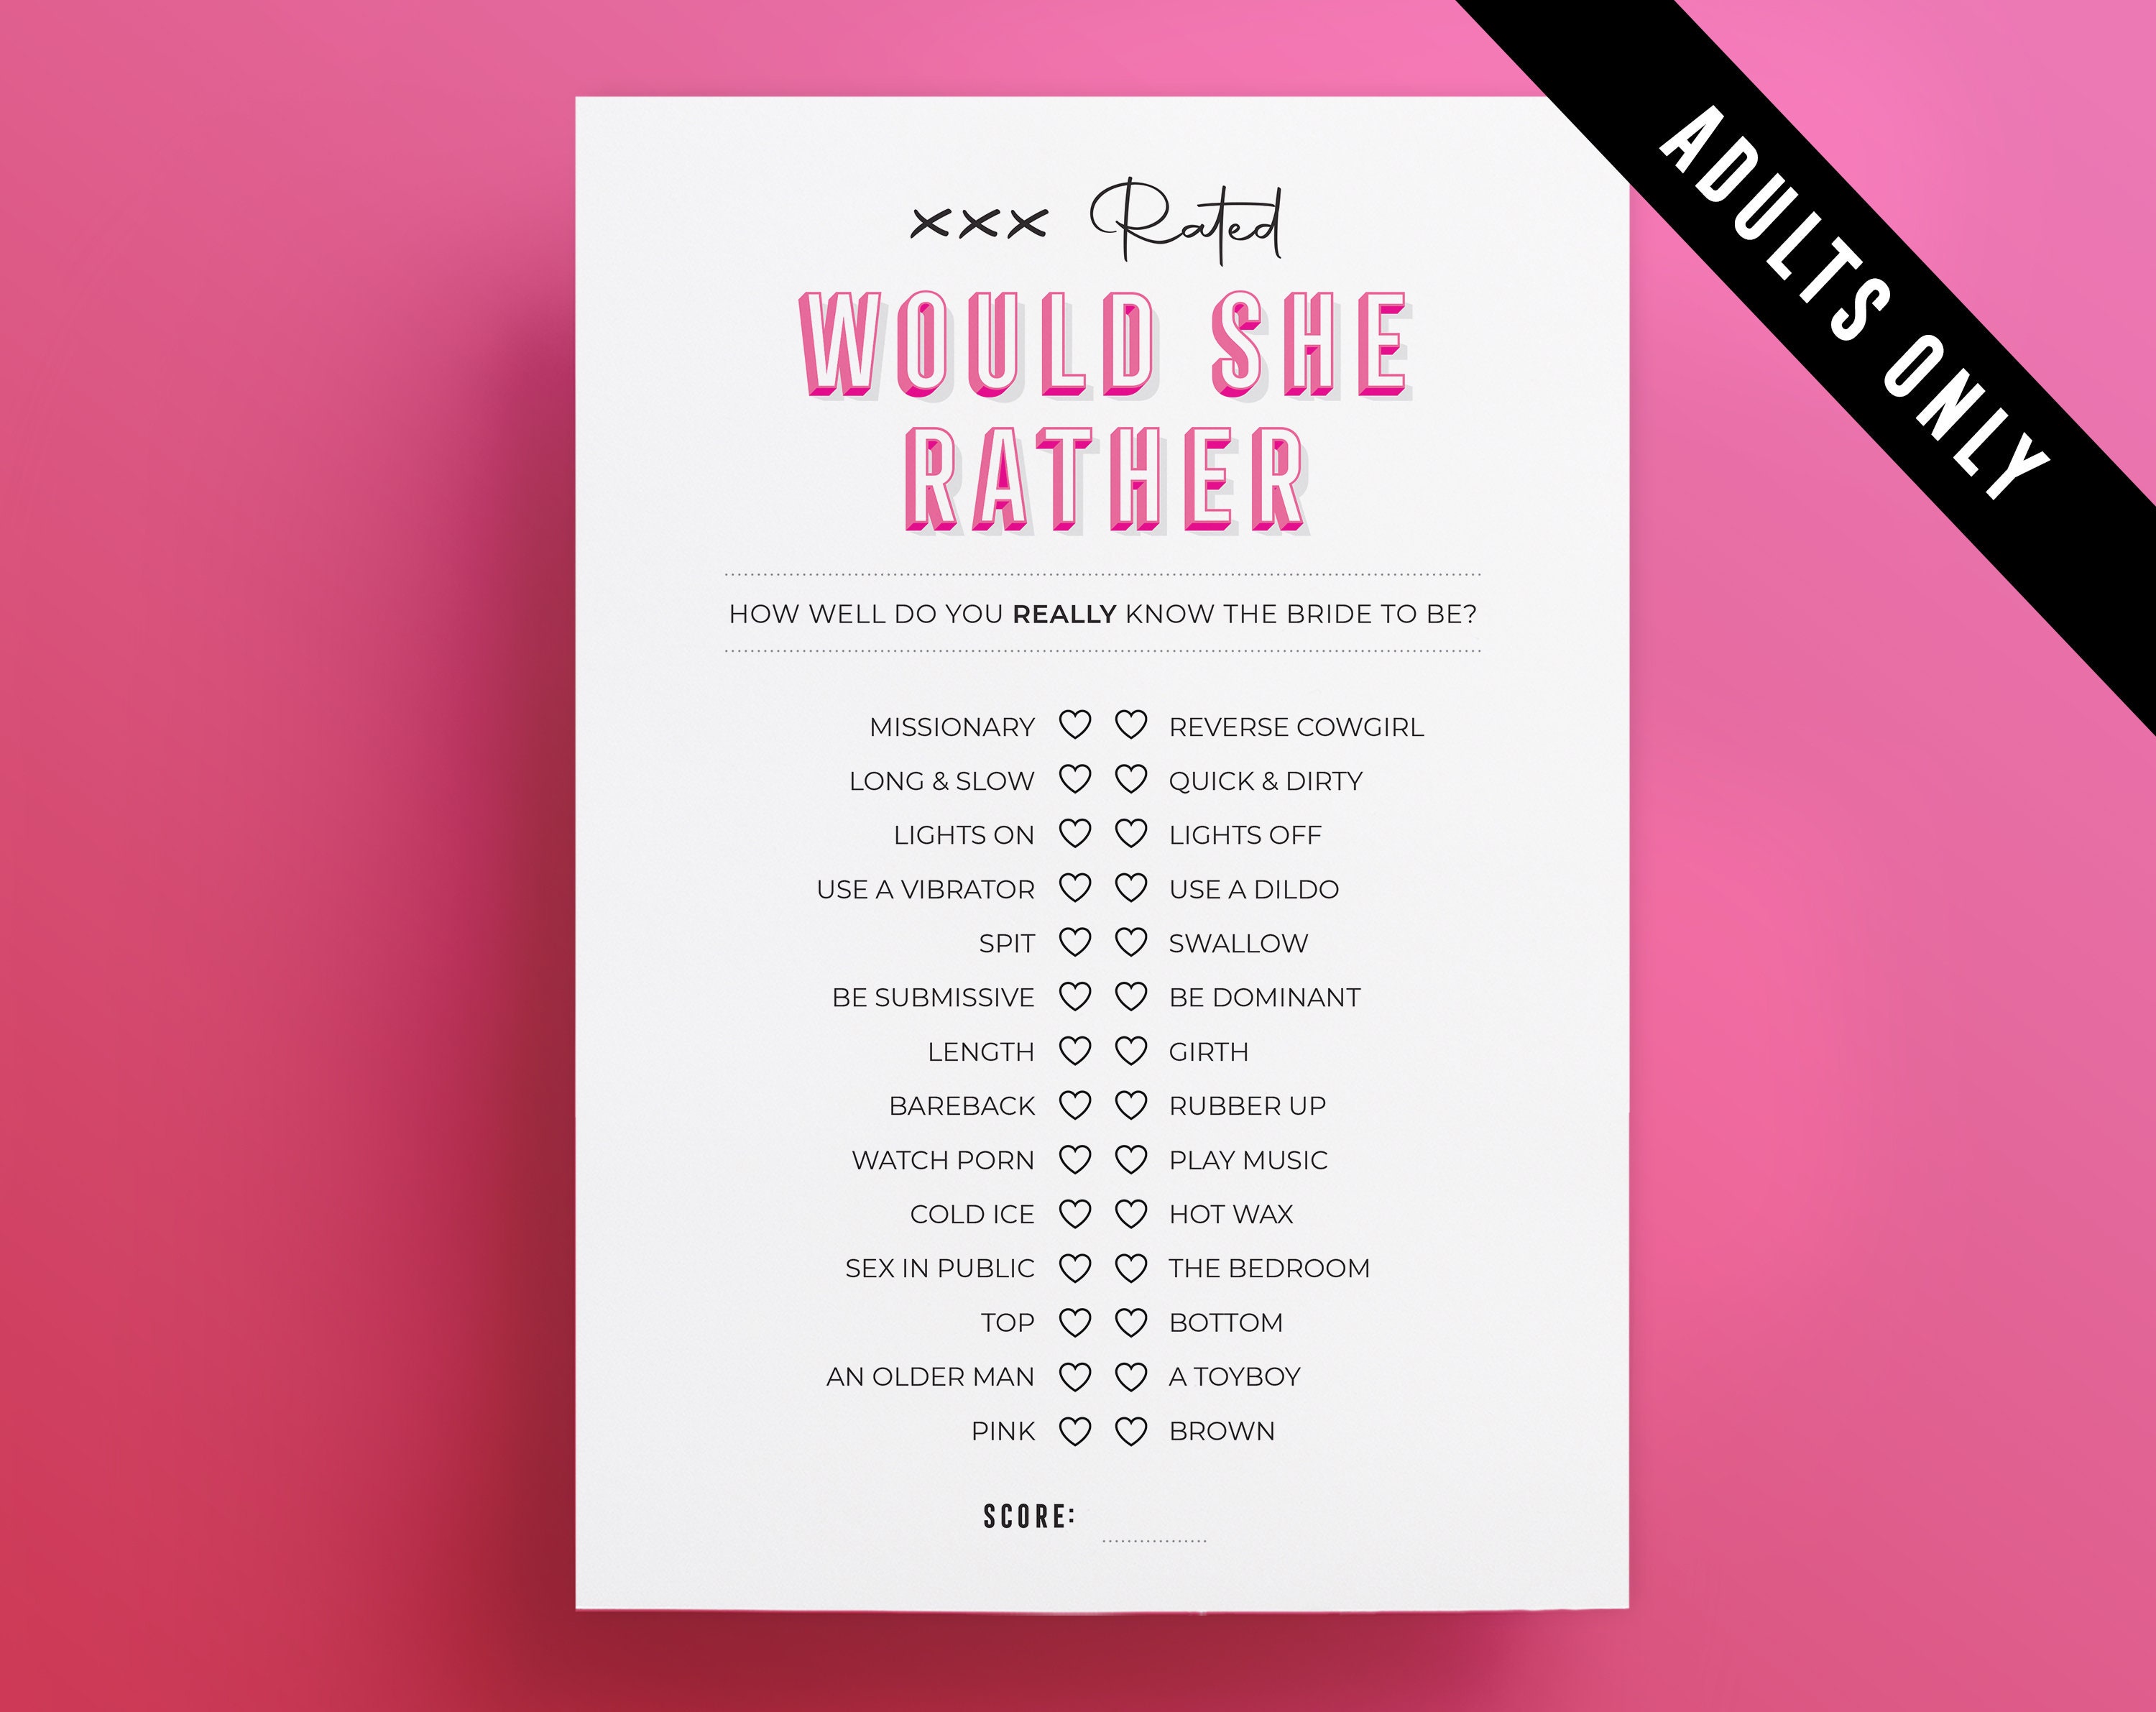 Bachelorette X Rated Would She Rather Would You Rather Game Etsy 